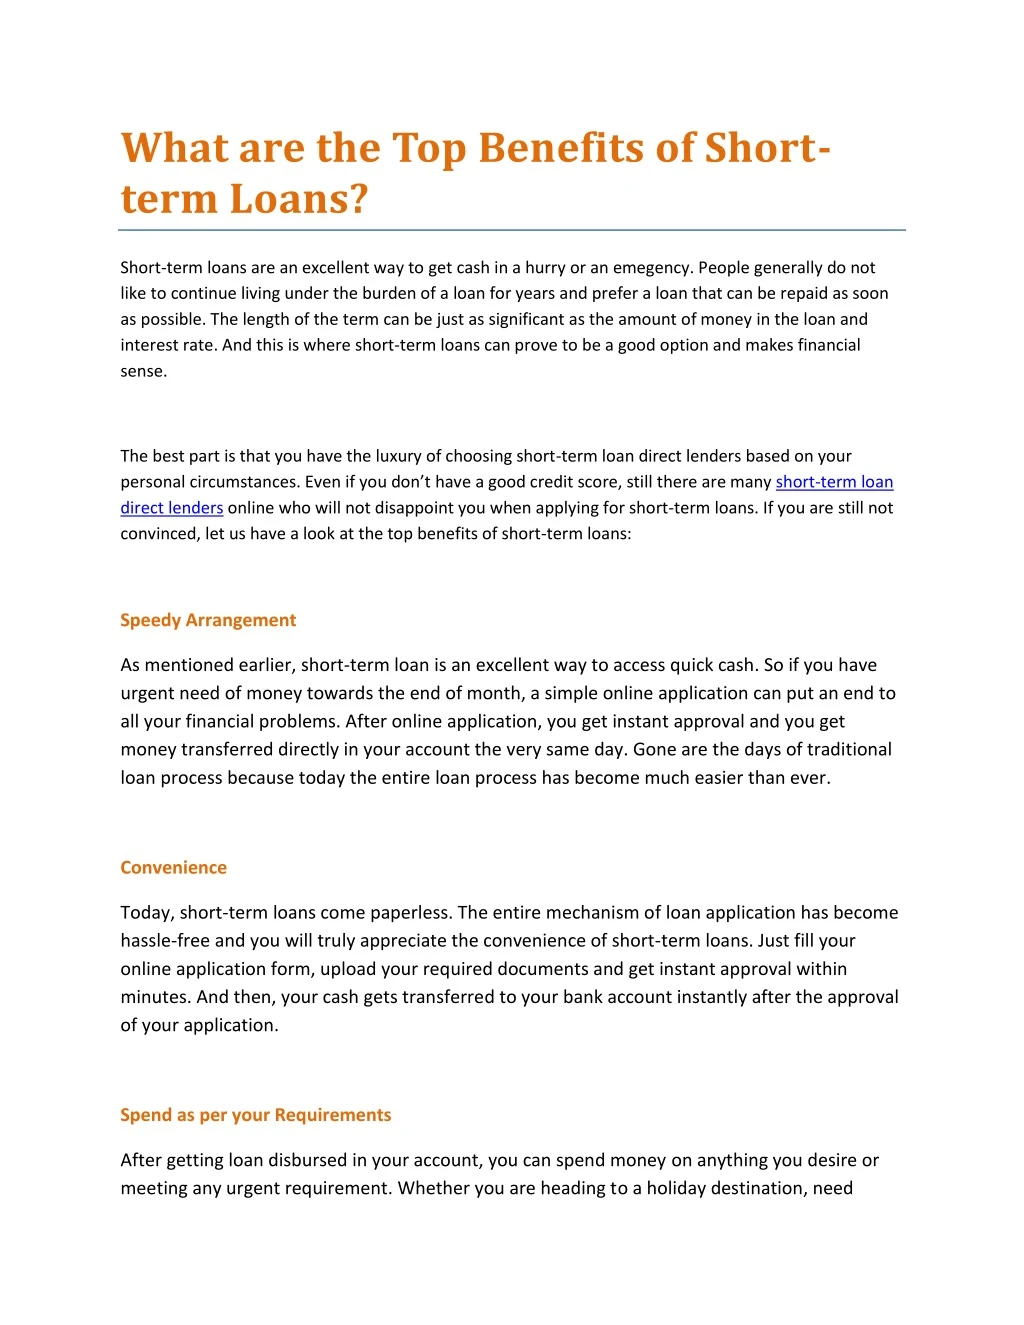 what are the top benefits of short term loans